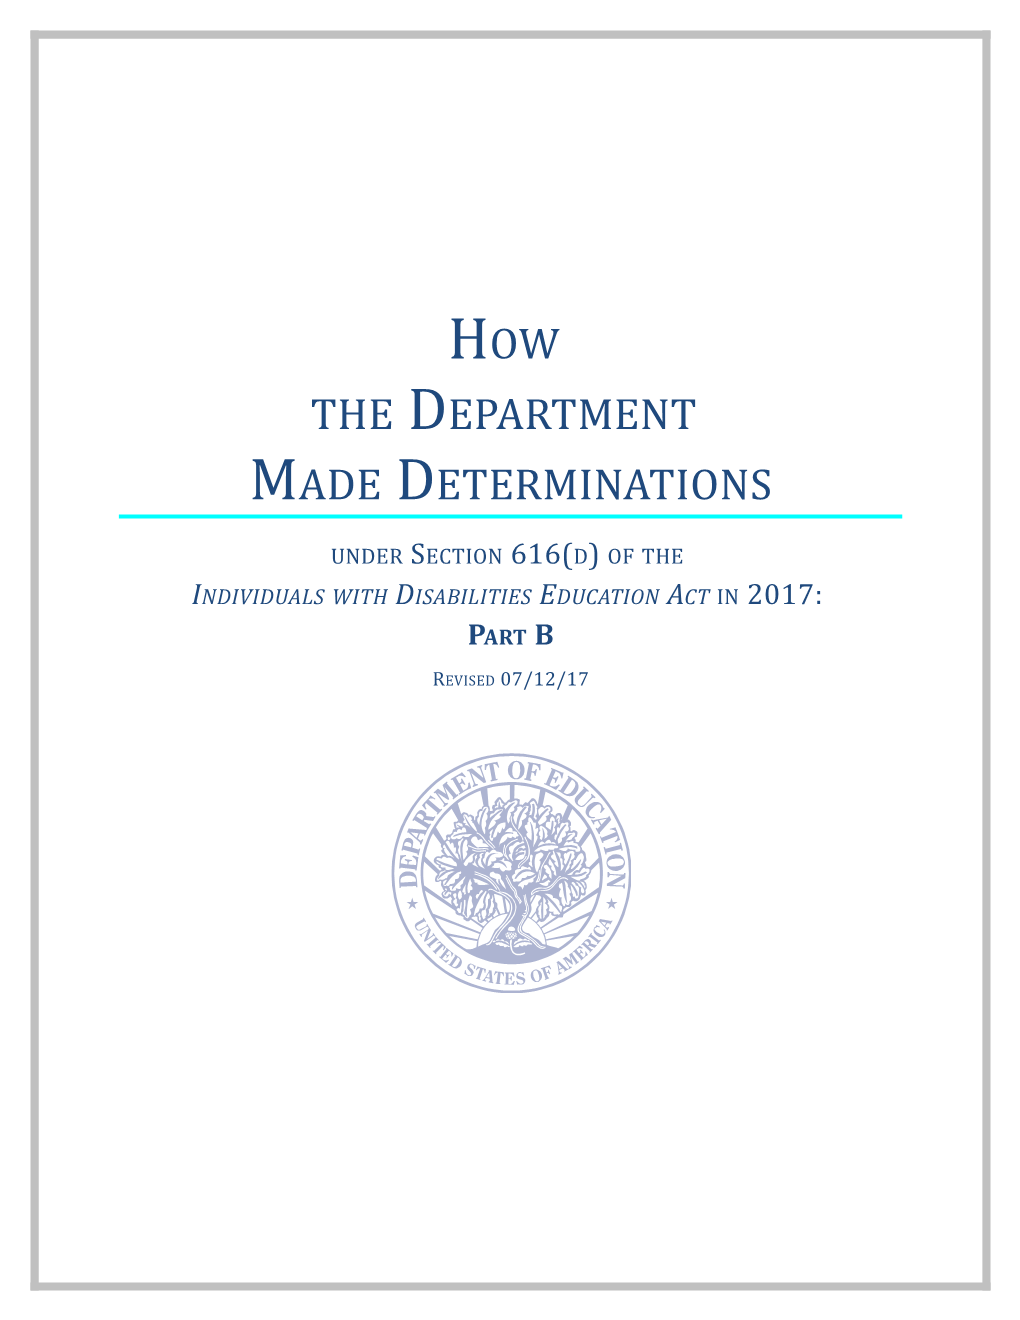 How the Department Made Determinations Under Section 616(D) of the Individuals with Disabilities